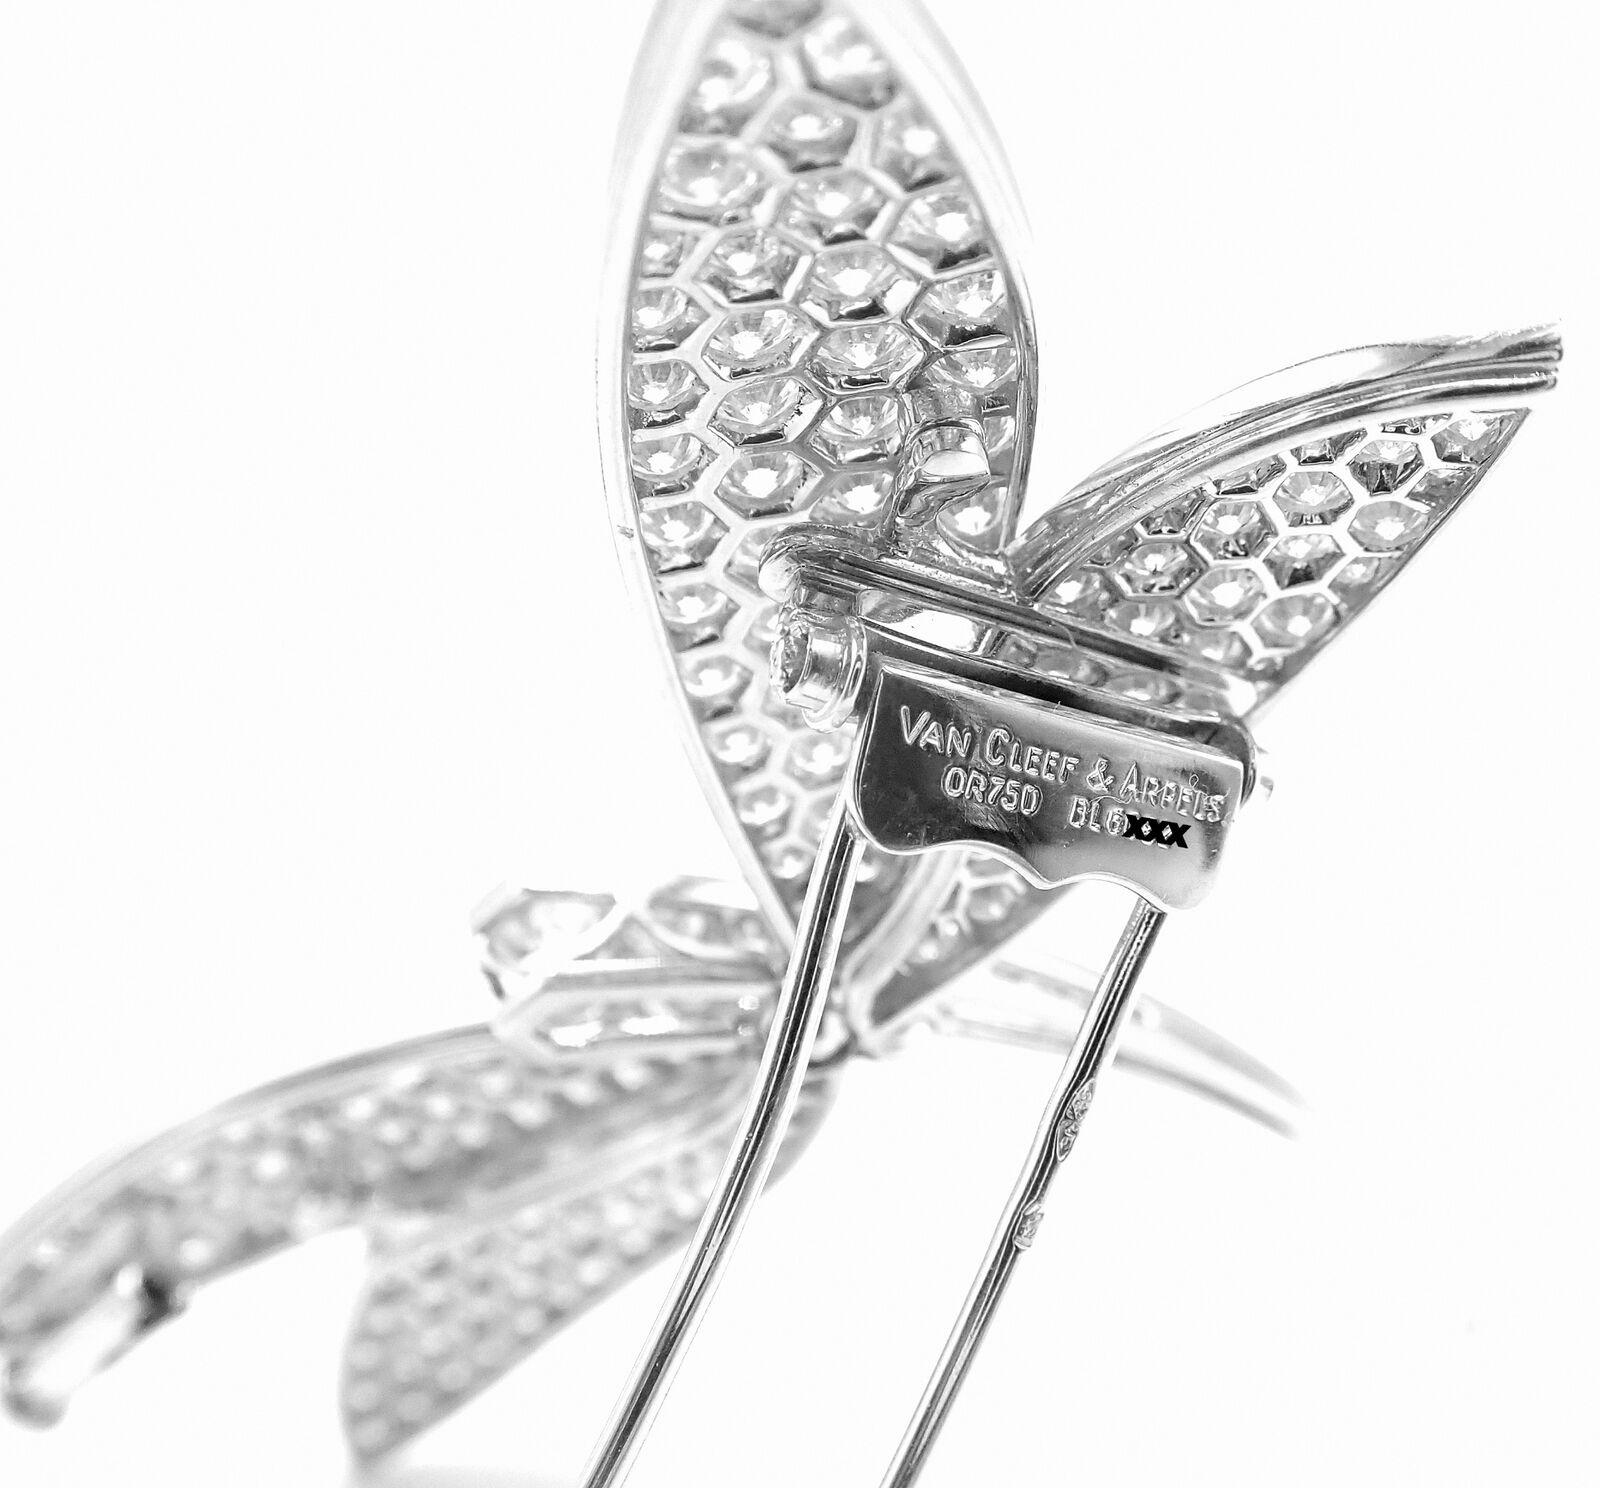 Van Cleef & Arpels Dragonfly Diamond Large White Gold Pin Brooch 2